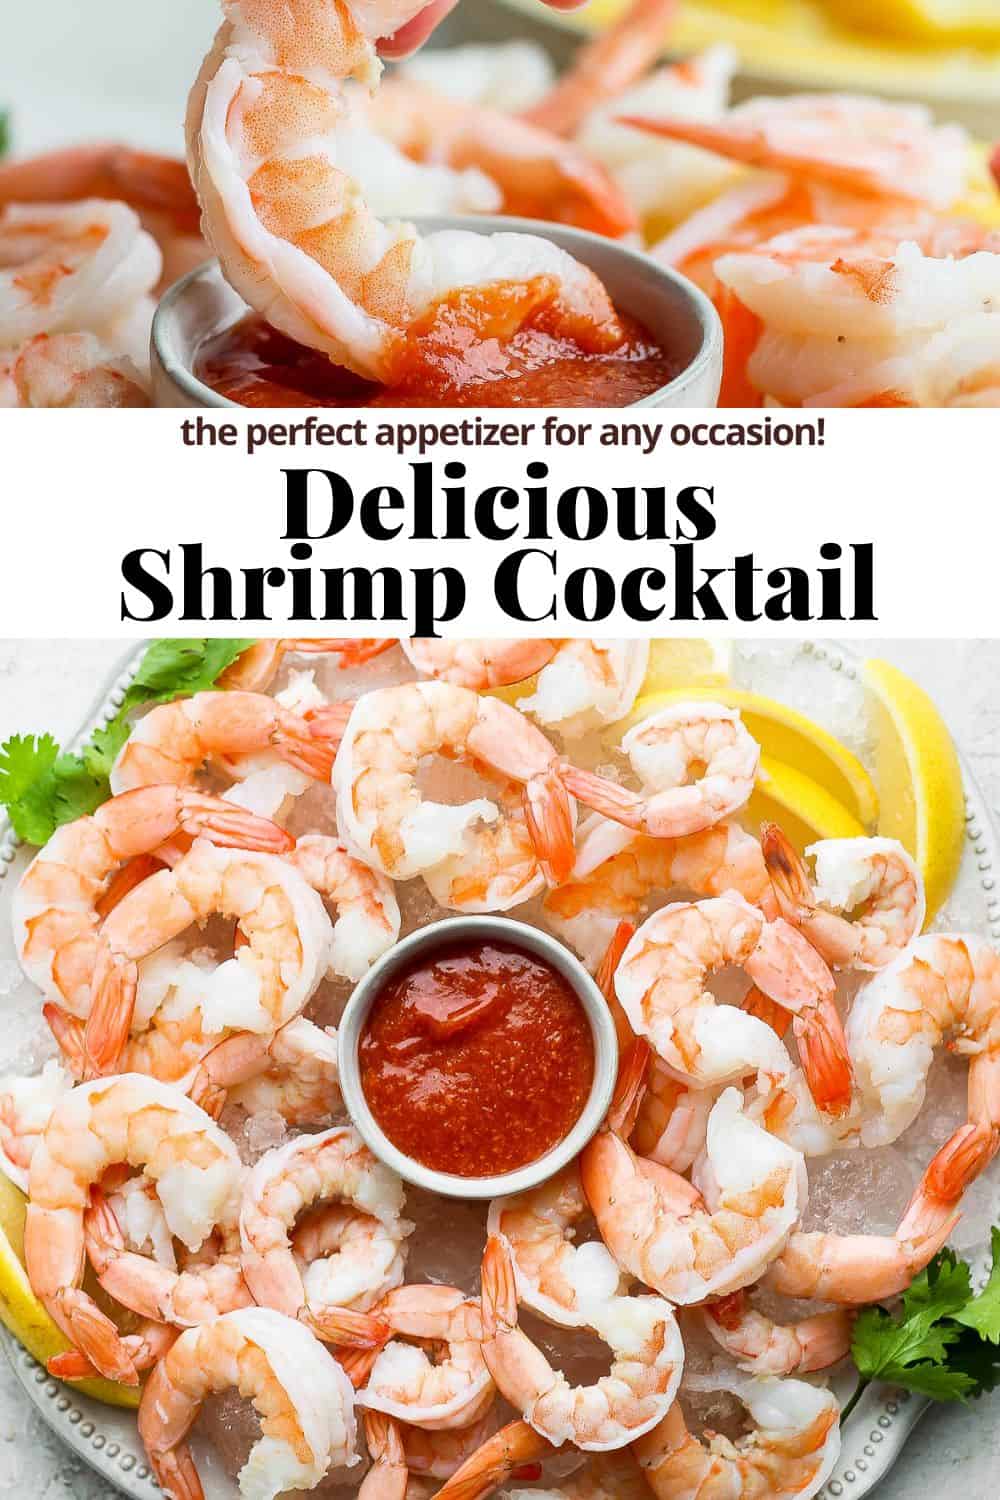 A pinterest image showing a hand scooping up cocktail sauce onto a shrimp, the recipe title in the middle, and a platter of shrimp cocktail as the bottom image.